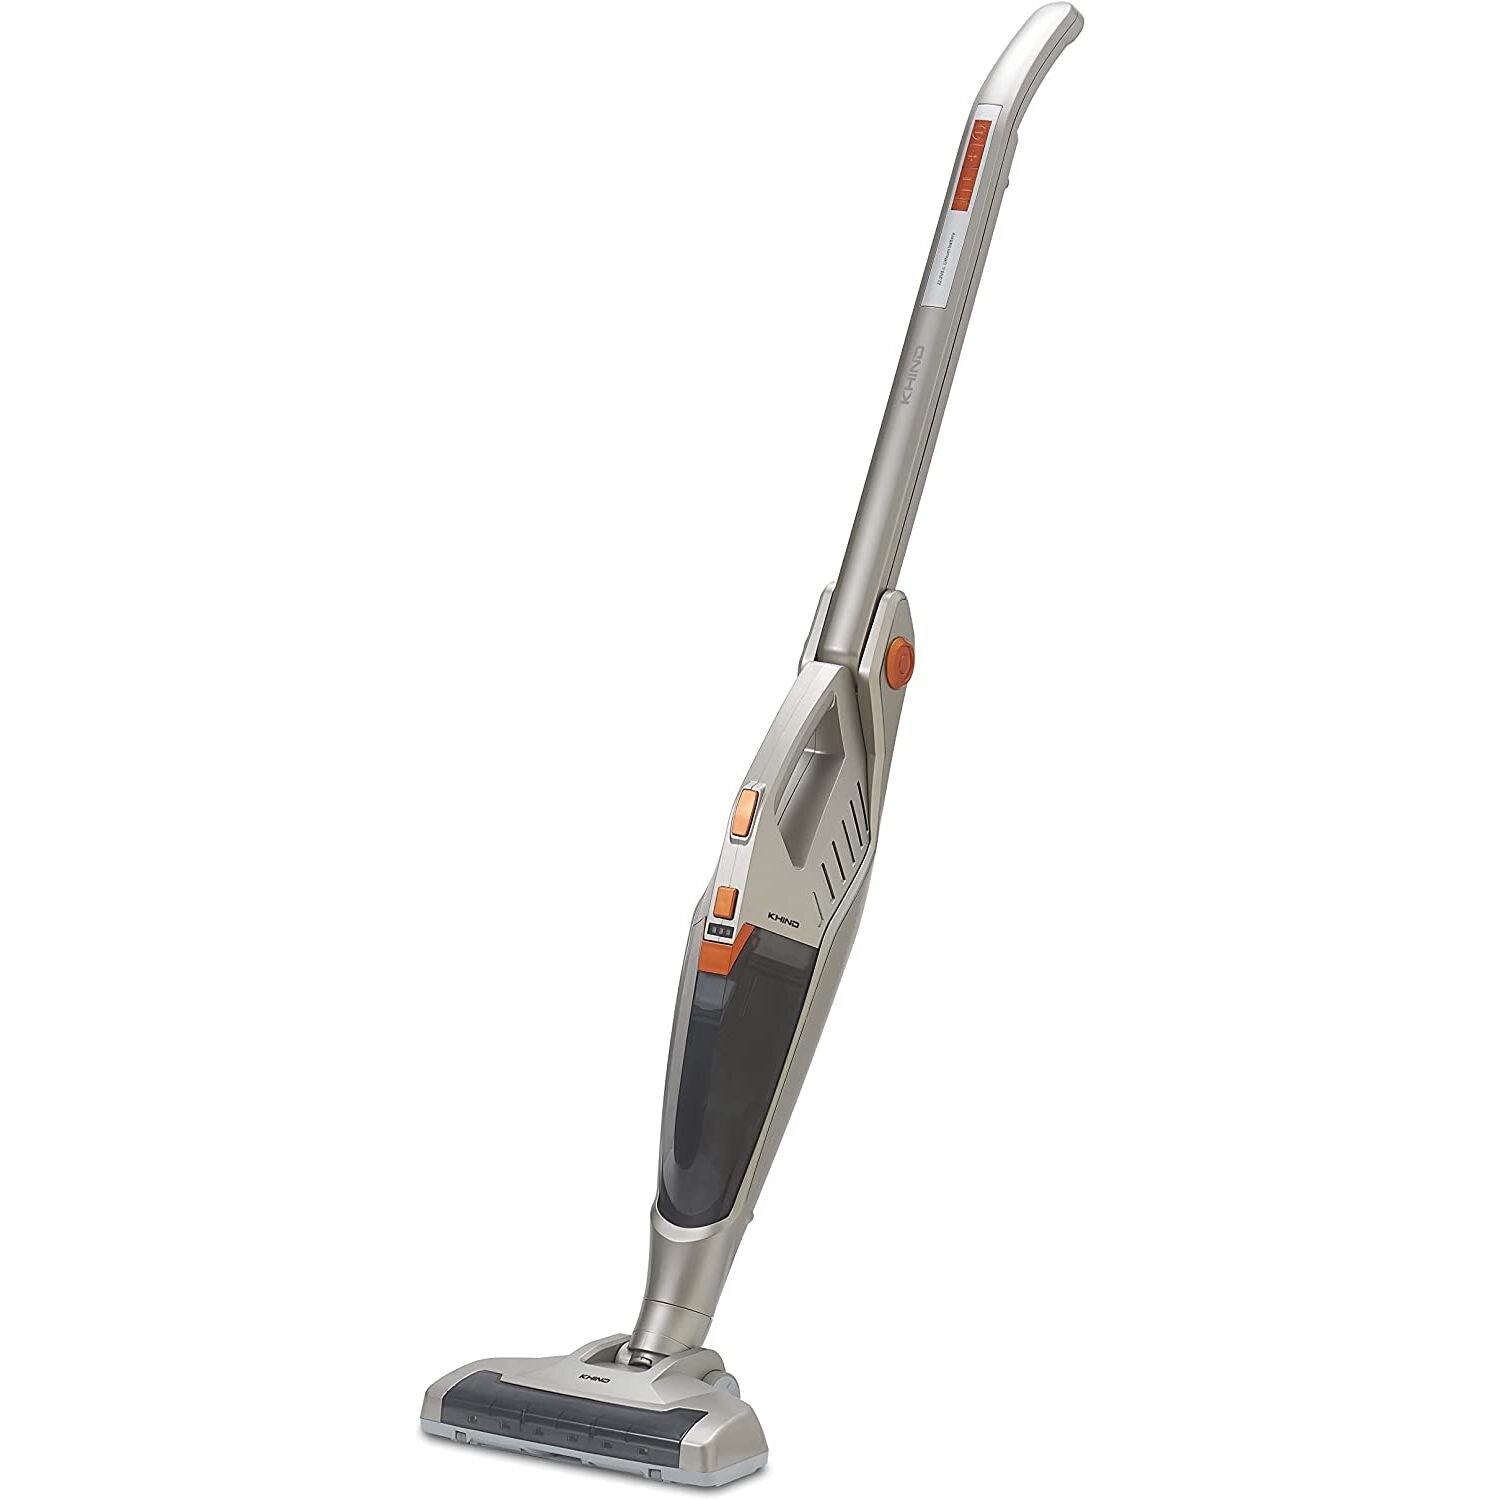 Khind 2-in-1 Upright Vacuum Cleaner, VC9000, Grey